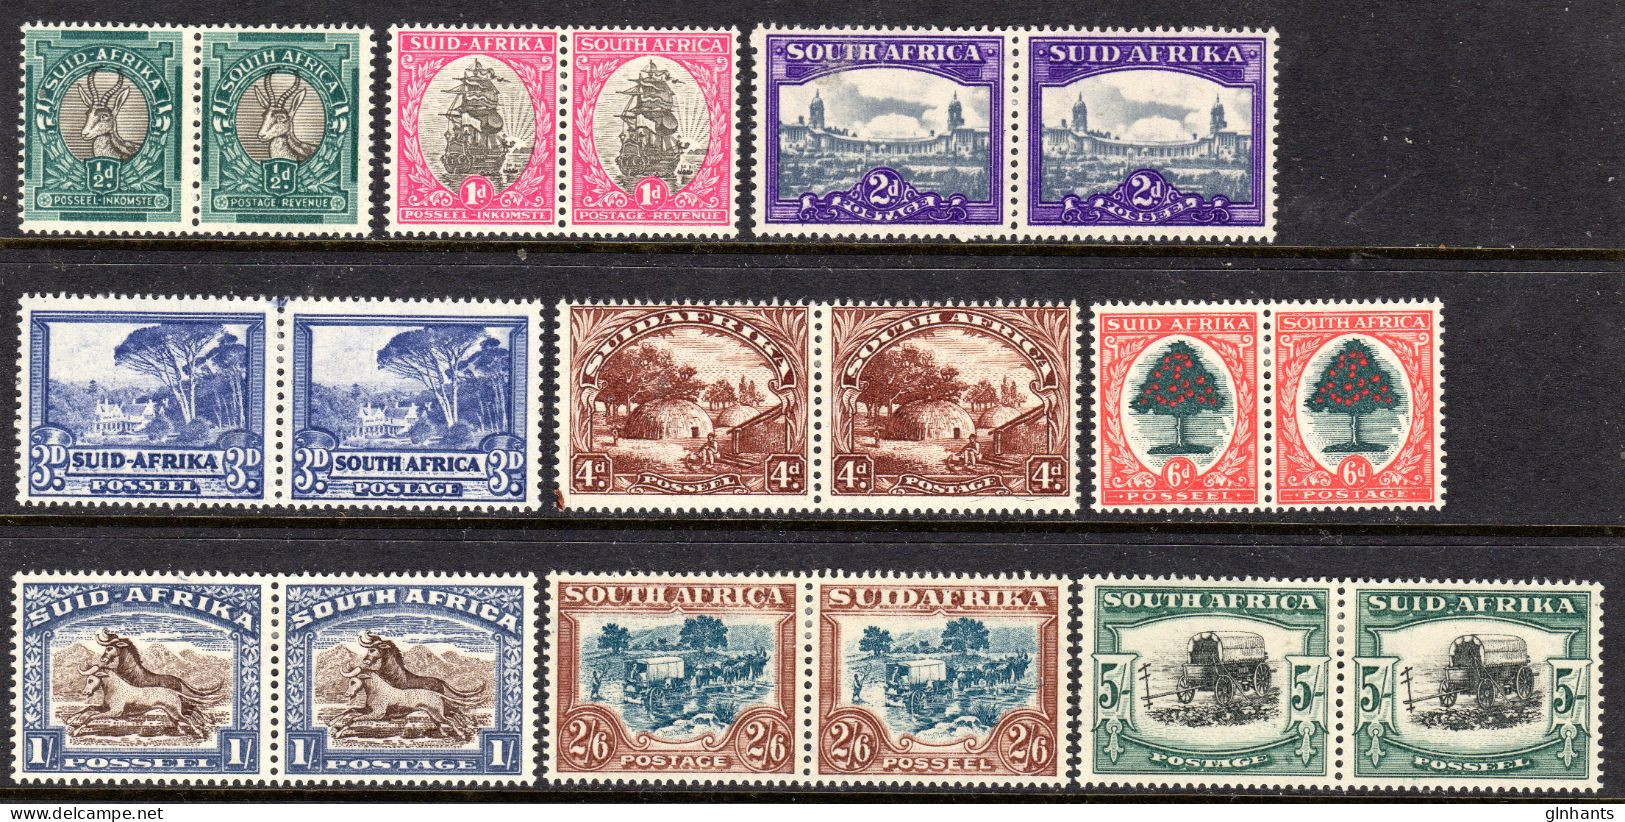 SOUTH AFRICA - 1947 DEFINITIVE SET IN PAIRS (18V) FINE LIGHTLY MOUNTED MINT LMM * SG 114-122 (2 SCANS) - Neufs